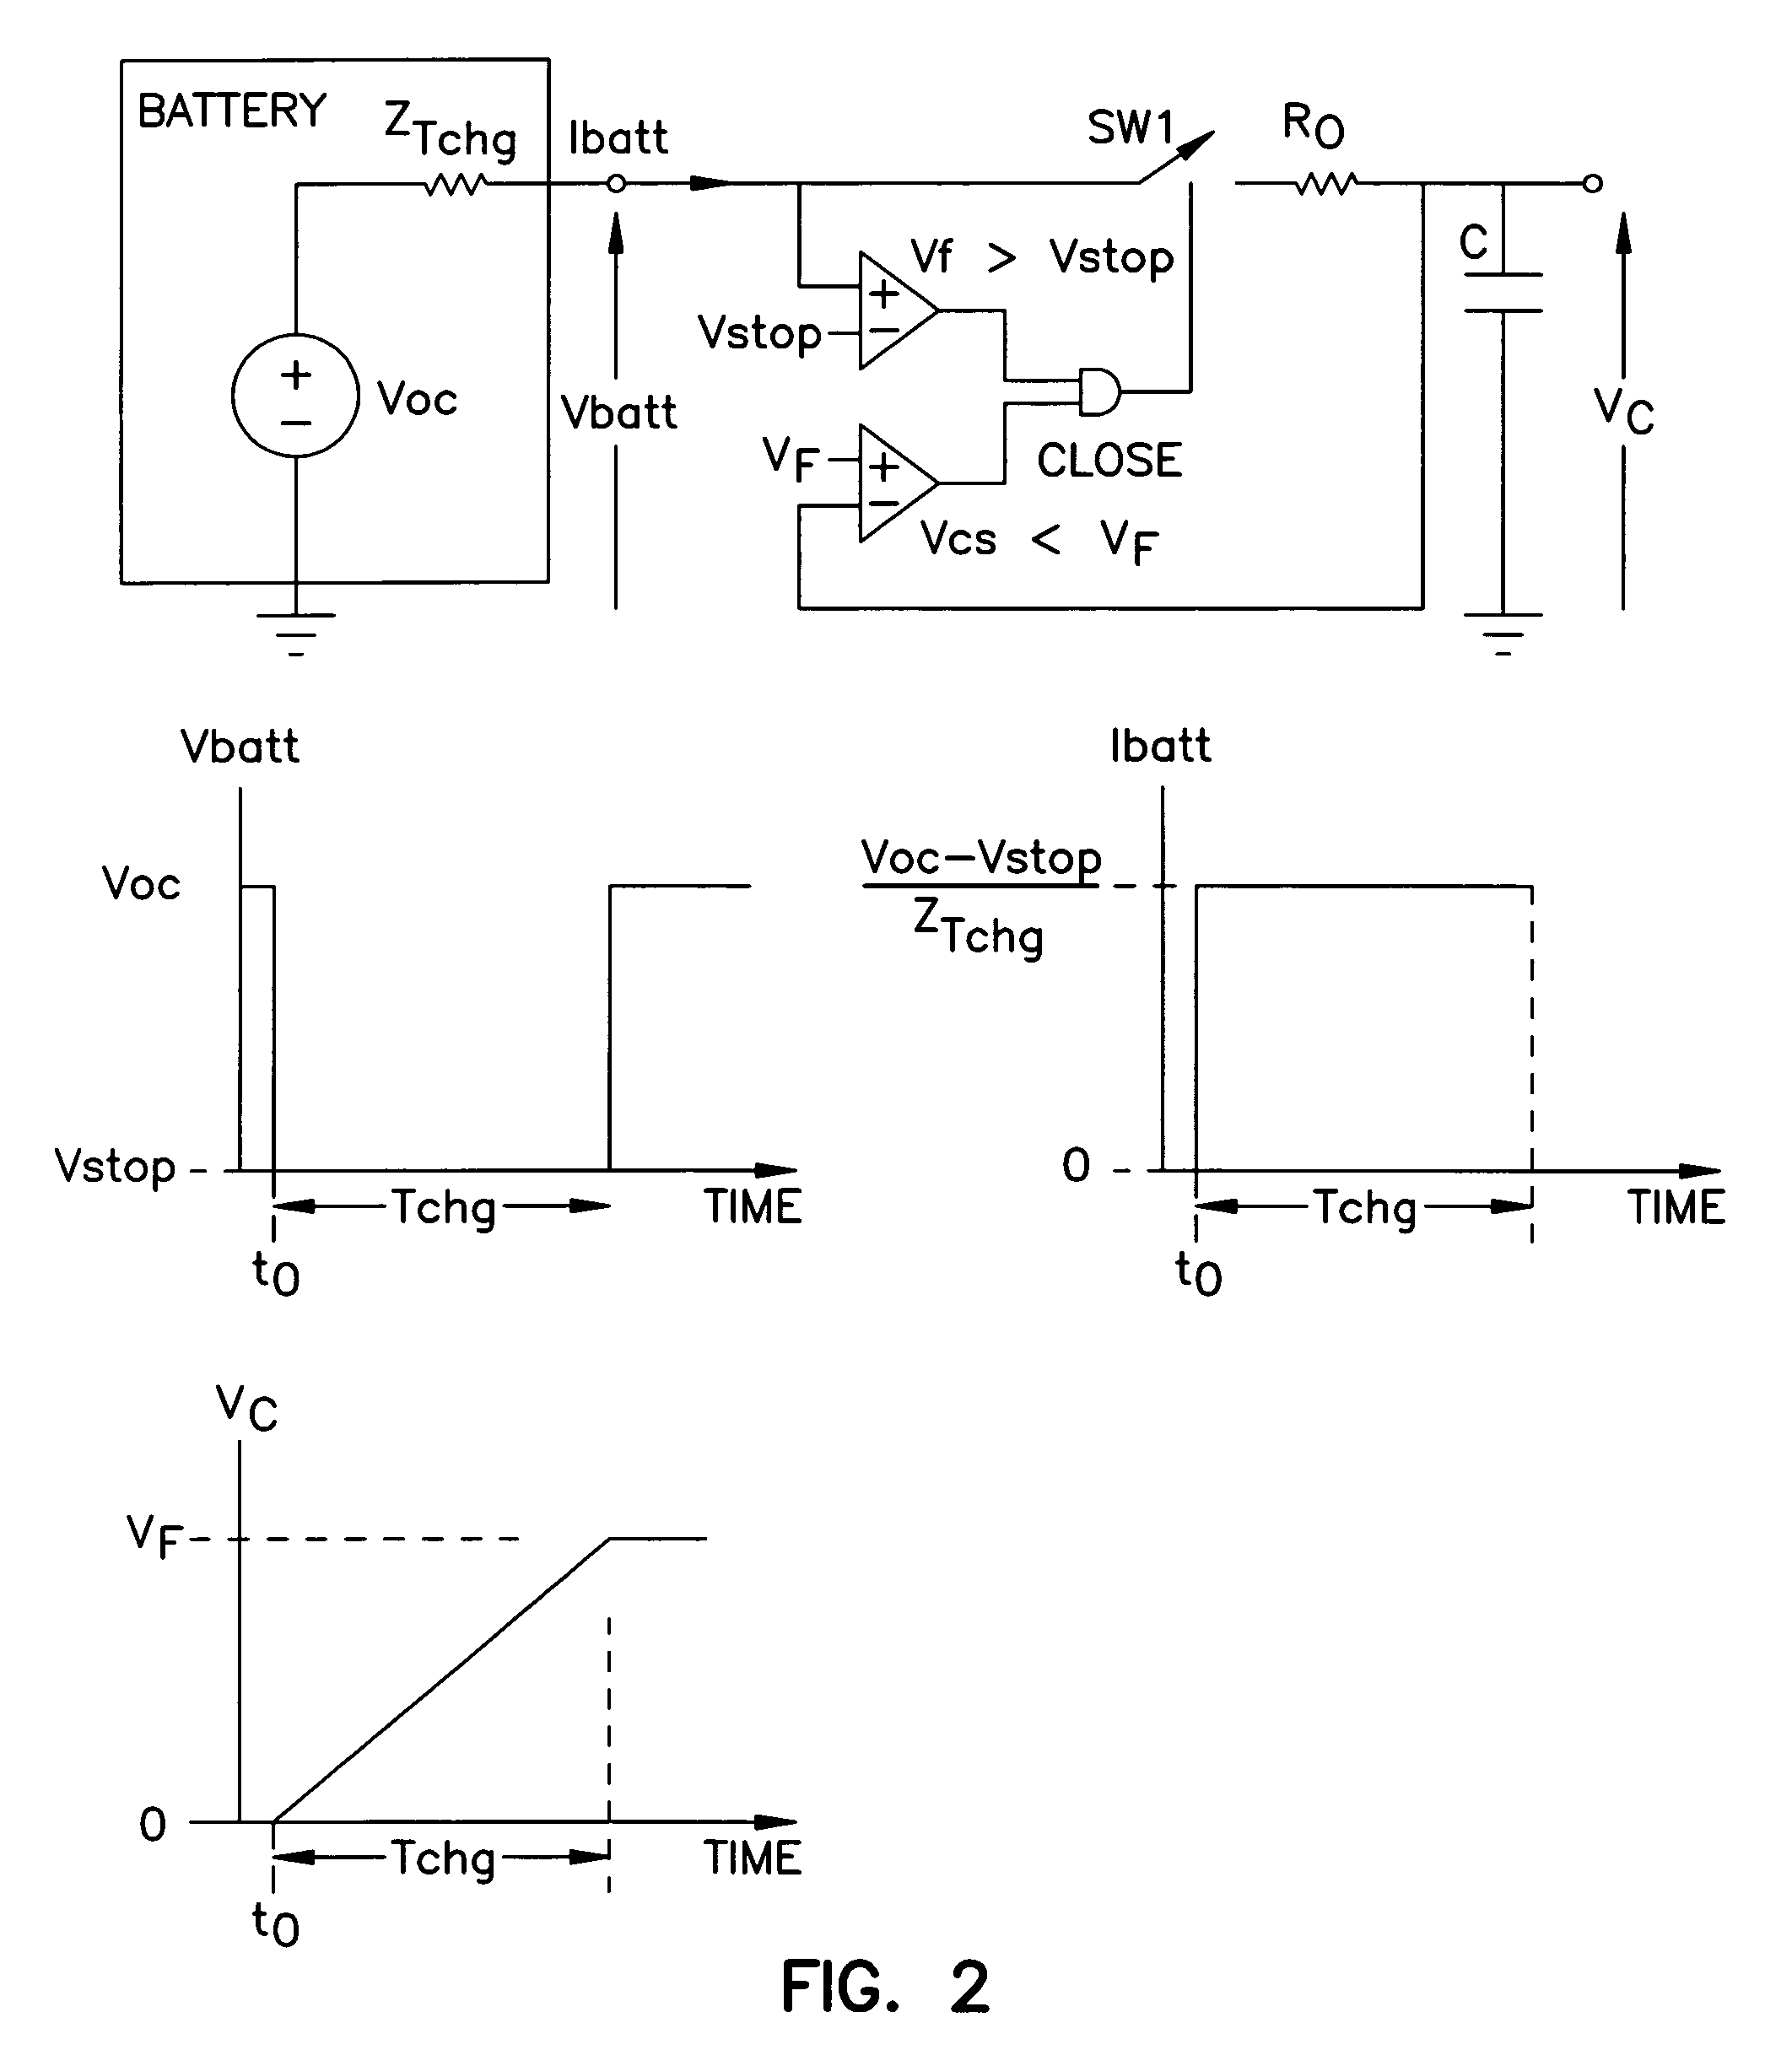 Method for monitoring end of life for battery